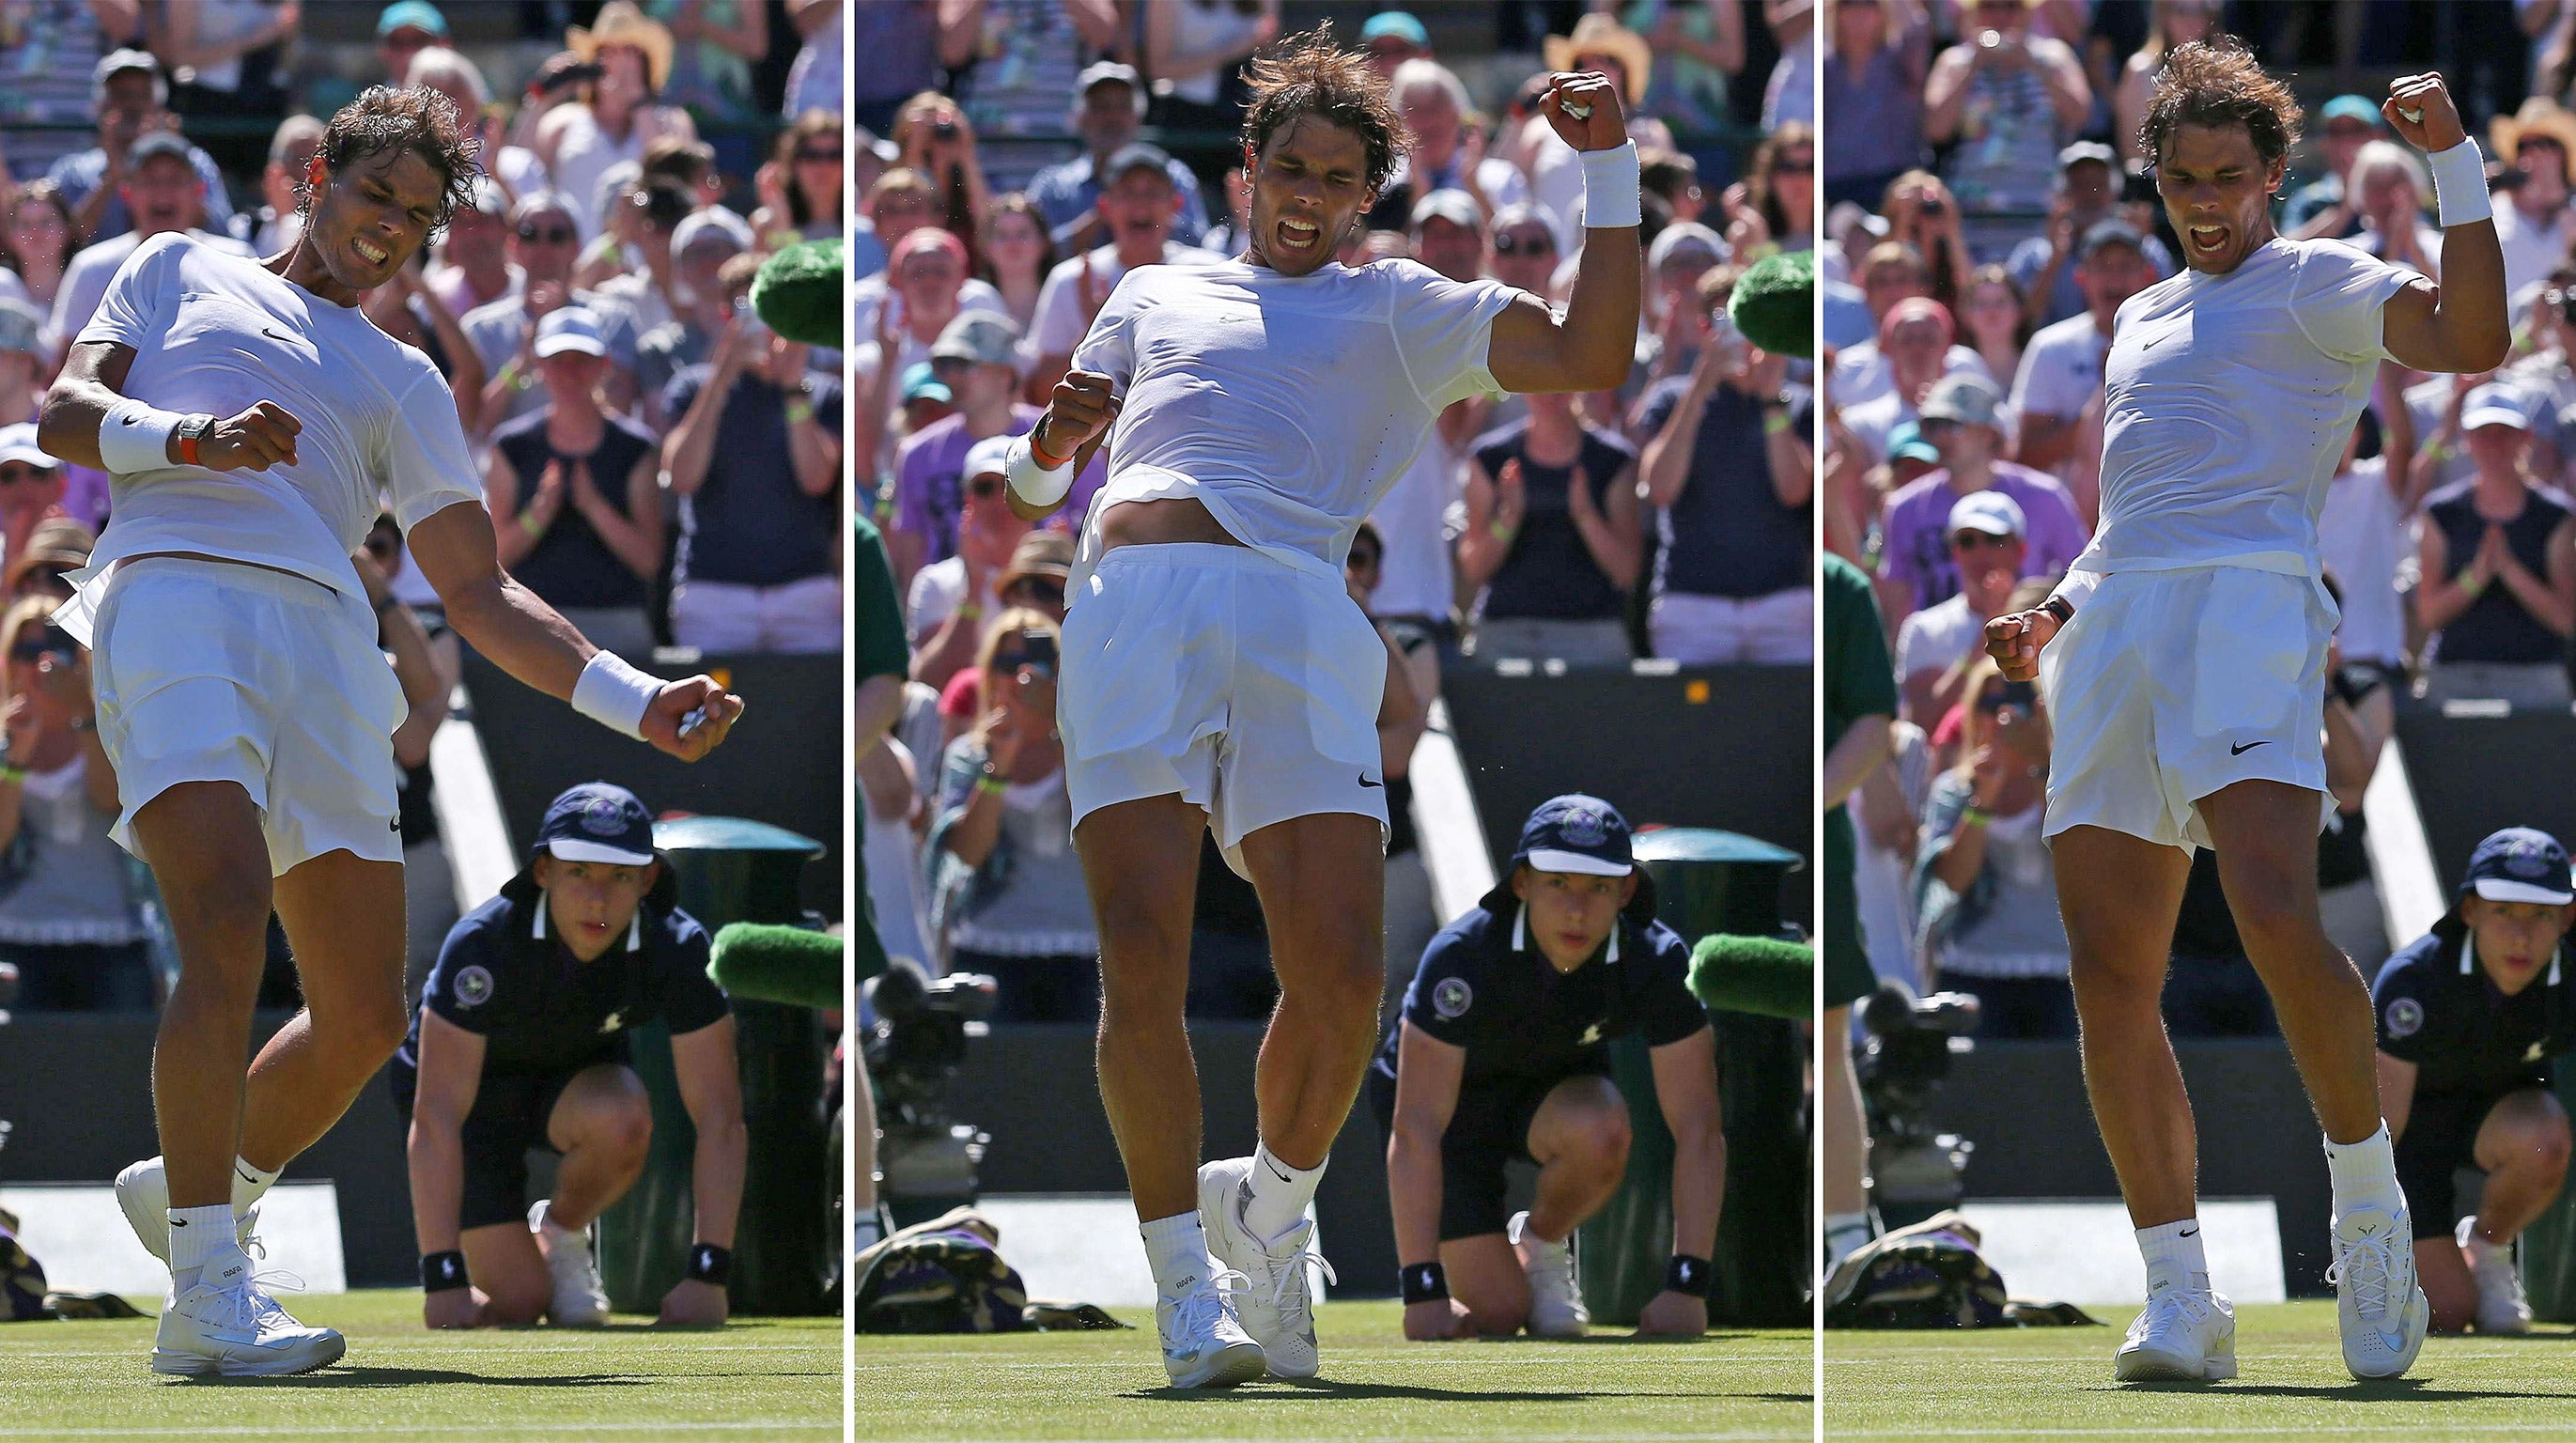 Rafael Nadal extravagantly celebrates his unconvincing first-round win over Thomaz Bellucci on Court No 1